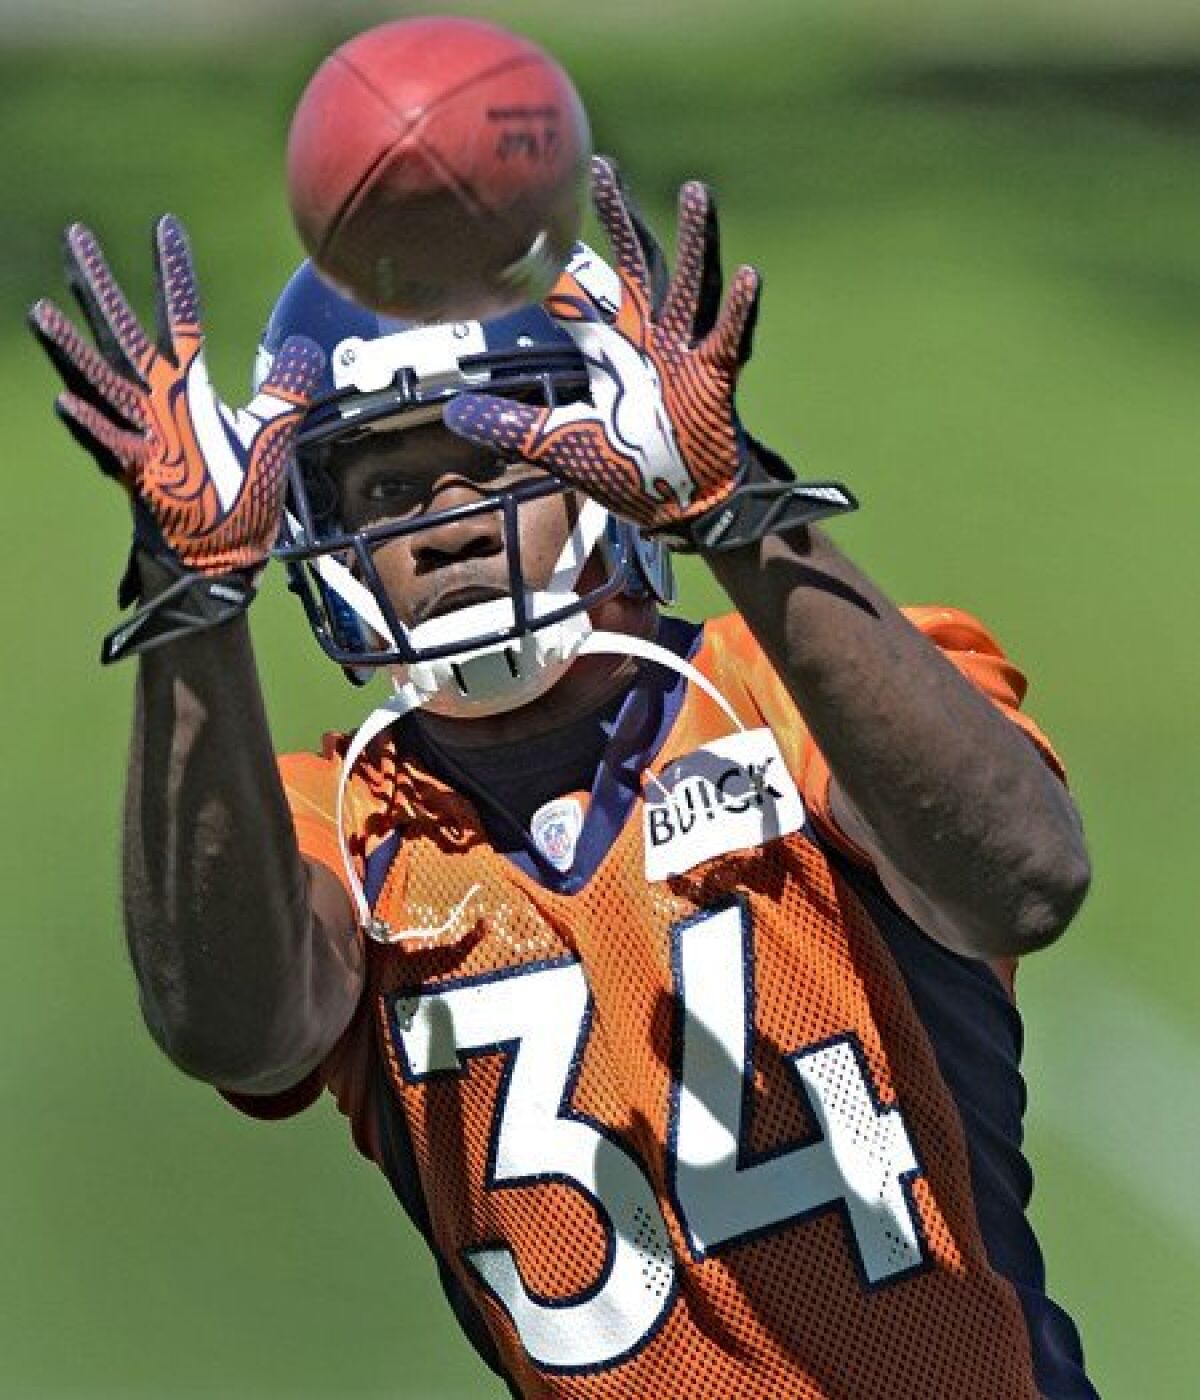 Broncos defensive back Quentin Jammer participates in a drill during practice Thursday.